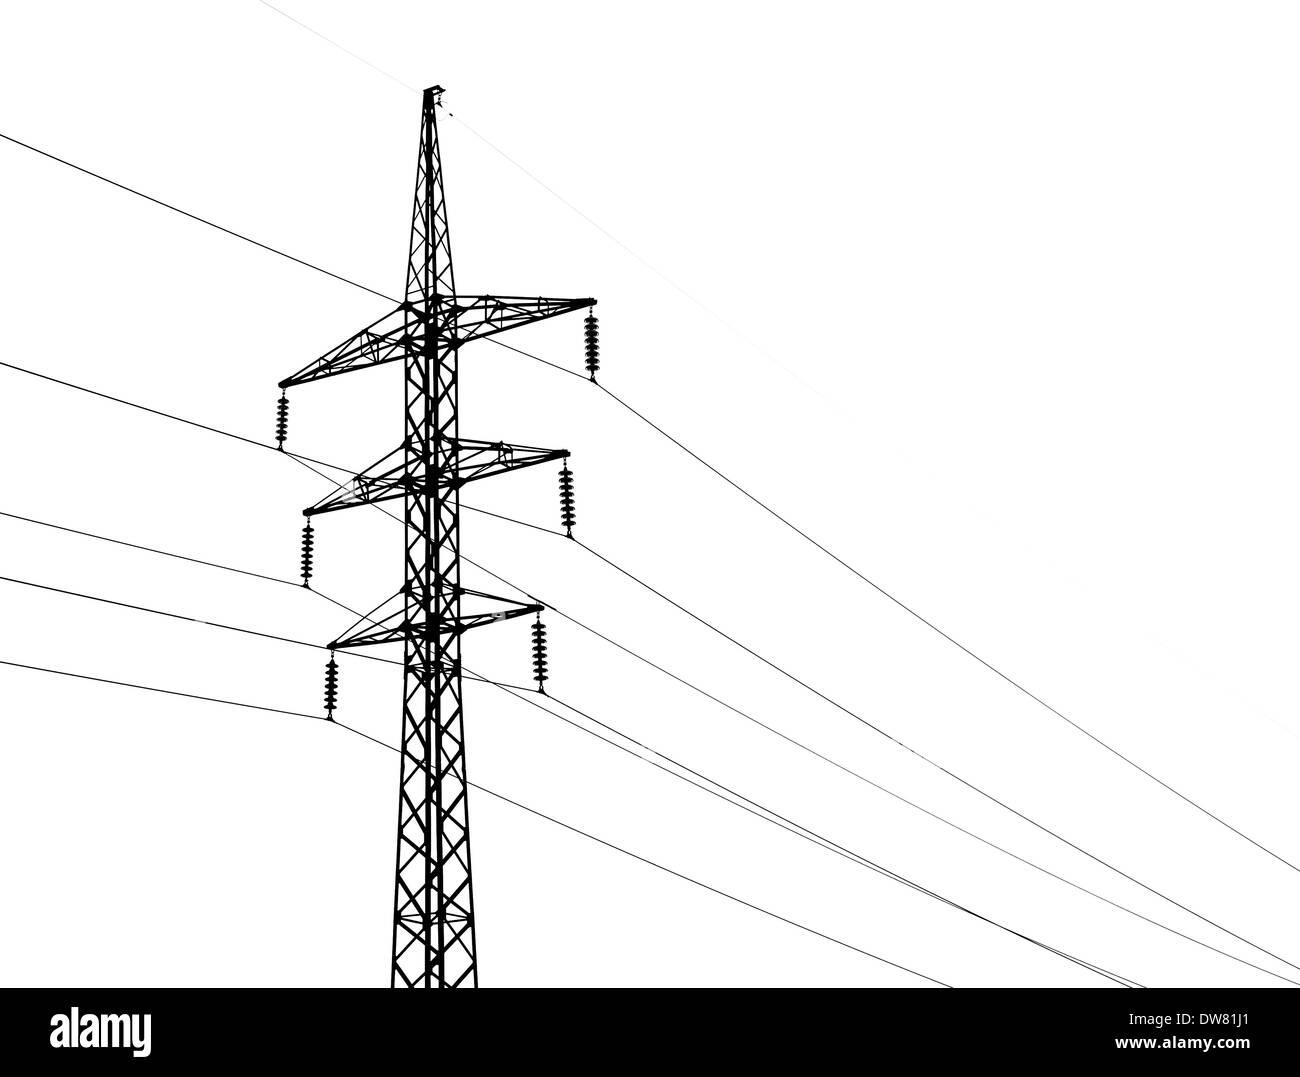 High voltage power lines and metal pylon isolated on white Stock Photo